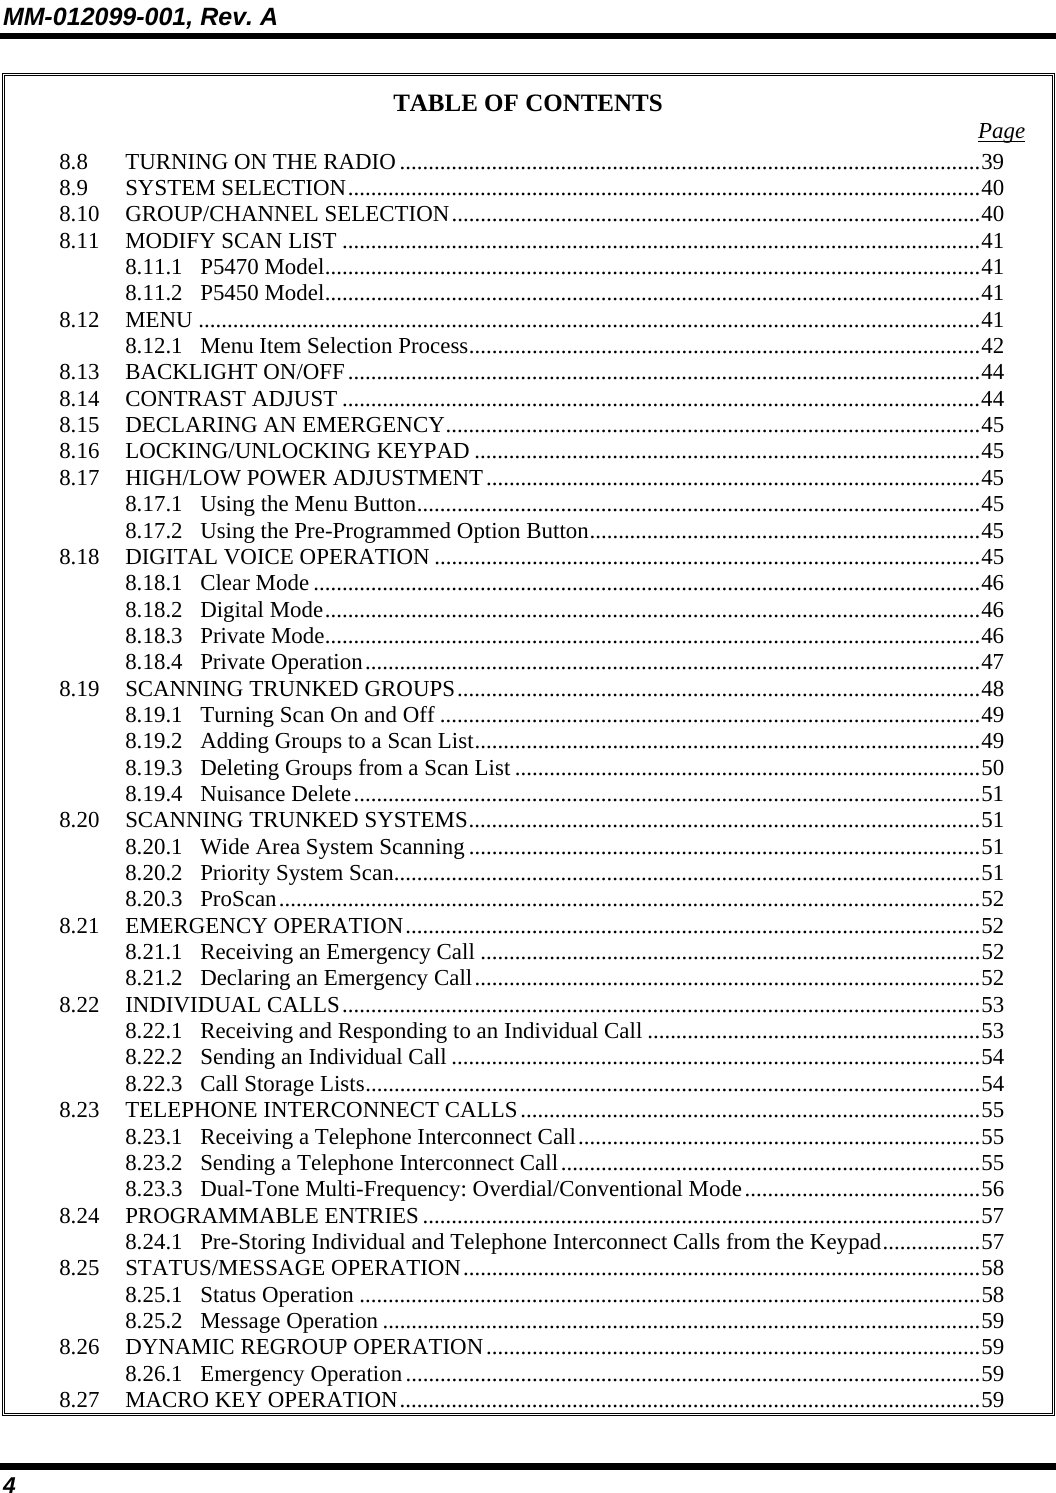 MM-012099-001, Rev. A 4 TABLE OF CONTENTS  Page 8.8 TURNING ON THE RADIO .....................................................................................................39 8.9 SYSTEM SELECTION..............................................................................................................40 8.10 GROUP/CHANNEL SELECTION............................................................................................40 8.11 MODIFY SCAN LIST ...............................................................................................................41 8.11.1 P5470 Model..................................................................................................................41 8.11.2 P5450 Model..................................................................................................................41 8.12 MENU ........................................................................................................................................41 8.12.1 Menu Item Selection Process.........................................................................................42 8.13 BACKLIGHT ON/OFF..............................................................................................................44 8.14 CONTRAST ADJUST ...............................................................................................................44 8.15 DECLARING AN EMERGENCY.............................................................................................45 8.16 LOCKING/UNLOCKING KEYPAD ........................................................................................45 8.17 HIGH/LOW POWER ADJUSTMENT......................................................................................45 8.17.1 Using the Menu Button..................................................................................................45 8.17.2 Using the Pre-Programmed Option Button....................................................................45 8.18 DIGITAL VOICE OPERATION ...............................................................................................45 8.18.1 Clear Mode ....................................................................................................................46 8.18.2 Digital Mode..................................................................................................................46 8.18.3 Private Mode..................................................................................................................46 8.18.4 Private Operation...........................................................................................................47 8.19 SCANNING TRUNKED GROUPS...........................................................................................48 8.19.1 Turning Scan On and Off ..............................................................................................49 8.19.2 Adding Groups to a Scan List........................................................................................49 8.19.3 Deleting Groups from a Scan List .................................................................................50 8.19.4 Nuisance Delete.............................................................................................................51 8.20 SCANNING TRUNKED SYSTEMS.........................................................................................51 8.20.1 Wide Area System Scanning .........................................................................................51 8.20.2 Priority System Scan......................................................................................................51 8.20.3 ProScan..........................................................................................................................52 8.21 EMERGENCY OPERATION....................................................................................................52 8.21.1 Receiving an Emergency Call .......................................................................................52 8.21.2 Declaring an Emergency Call........................................................................................52 8.22 INDIVIDUAL CALLS...............................................................................................................53 8.22.1 Receiving and Responding to an Individual Call ..........................................................53 8.22.2 Sending an Individual Call ............................................................................................54 8.22.3 Call Storage Lists...........................................................................................................54 8.23 TELEPHONE INTERCONNECT CALLS................................................................................55 8.23.1 Receiving a Telephone Interconnect Call......................................................................55 8.23.2 Sending a Telephone Interconnect Call.........................................................................55 8.23.3 Dual-Tone Multi-Frequency: Overdial/Conventional Mode.........................................56 8.24 PROGRAMMABLE ENTRIES .................................................................................................57 8.24.1 Pre-Storing Individual and Telephone Interconnect Calls from the Keypad.................57 8.25 STATUS/MESSAGE OPERATION..........................................................................................58 8.25.1 Status Operation ............................................................................................................58 8.25.2 Message Operation ........................................................................................................59 8.26 DYNAMIC REGROUP OPERATION......................................................................................59 8.26.1 Emergency Operation....................................................................................................59 8.27 MACRO KEY OPERATION.....................................................................................................59 